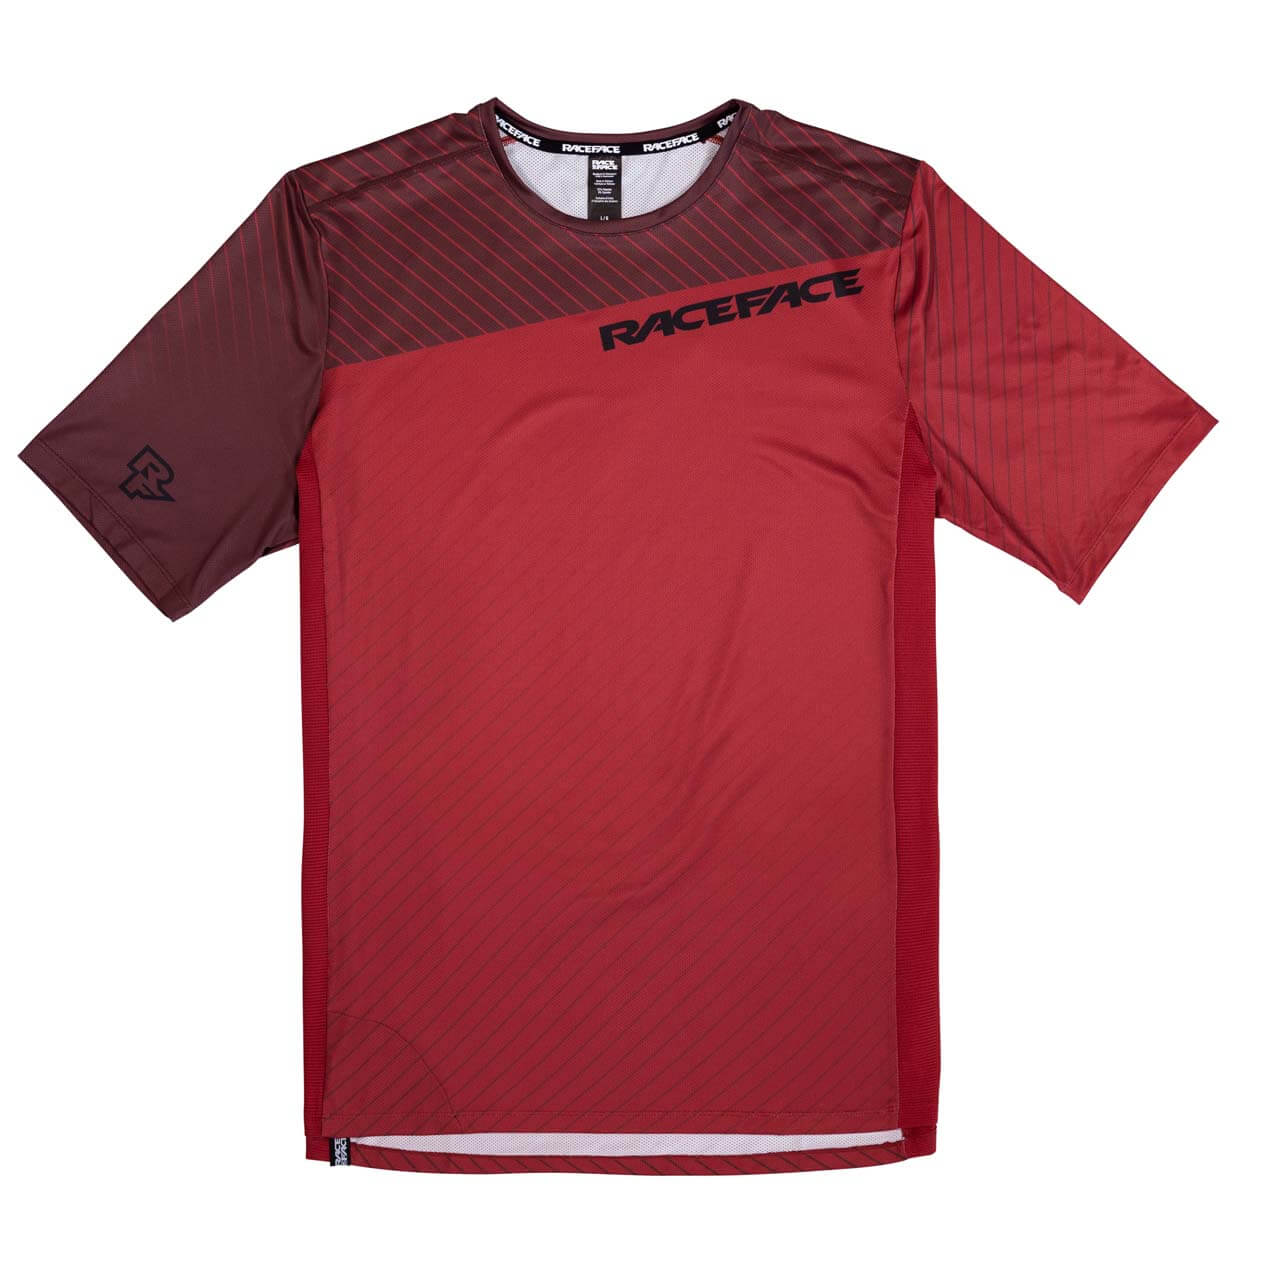 Race Face Bike-Jersey Indy - Red, M von RaceFace